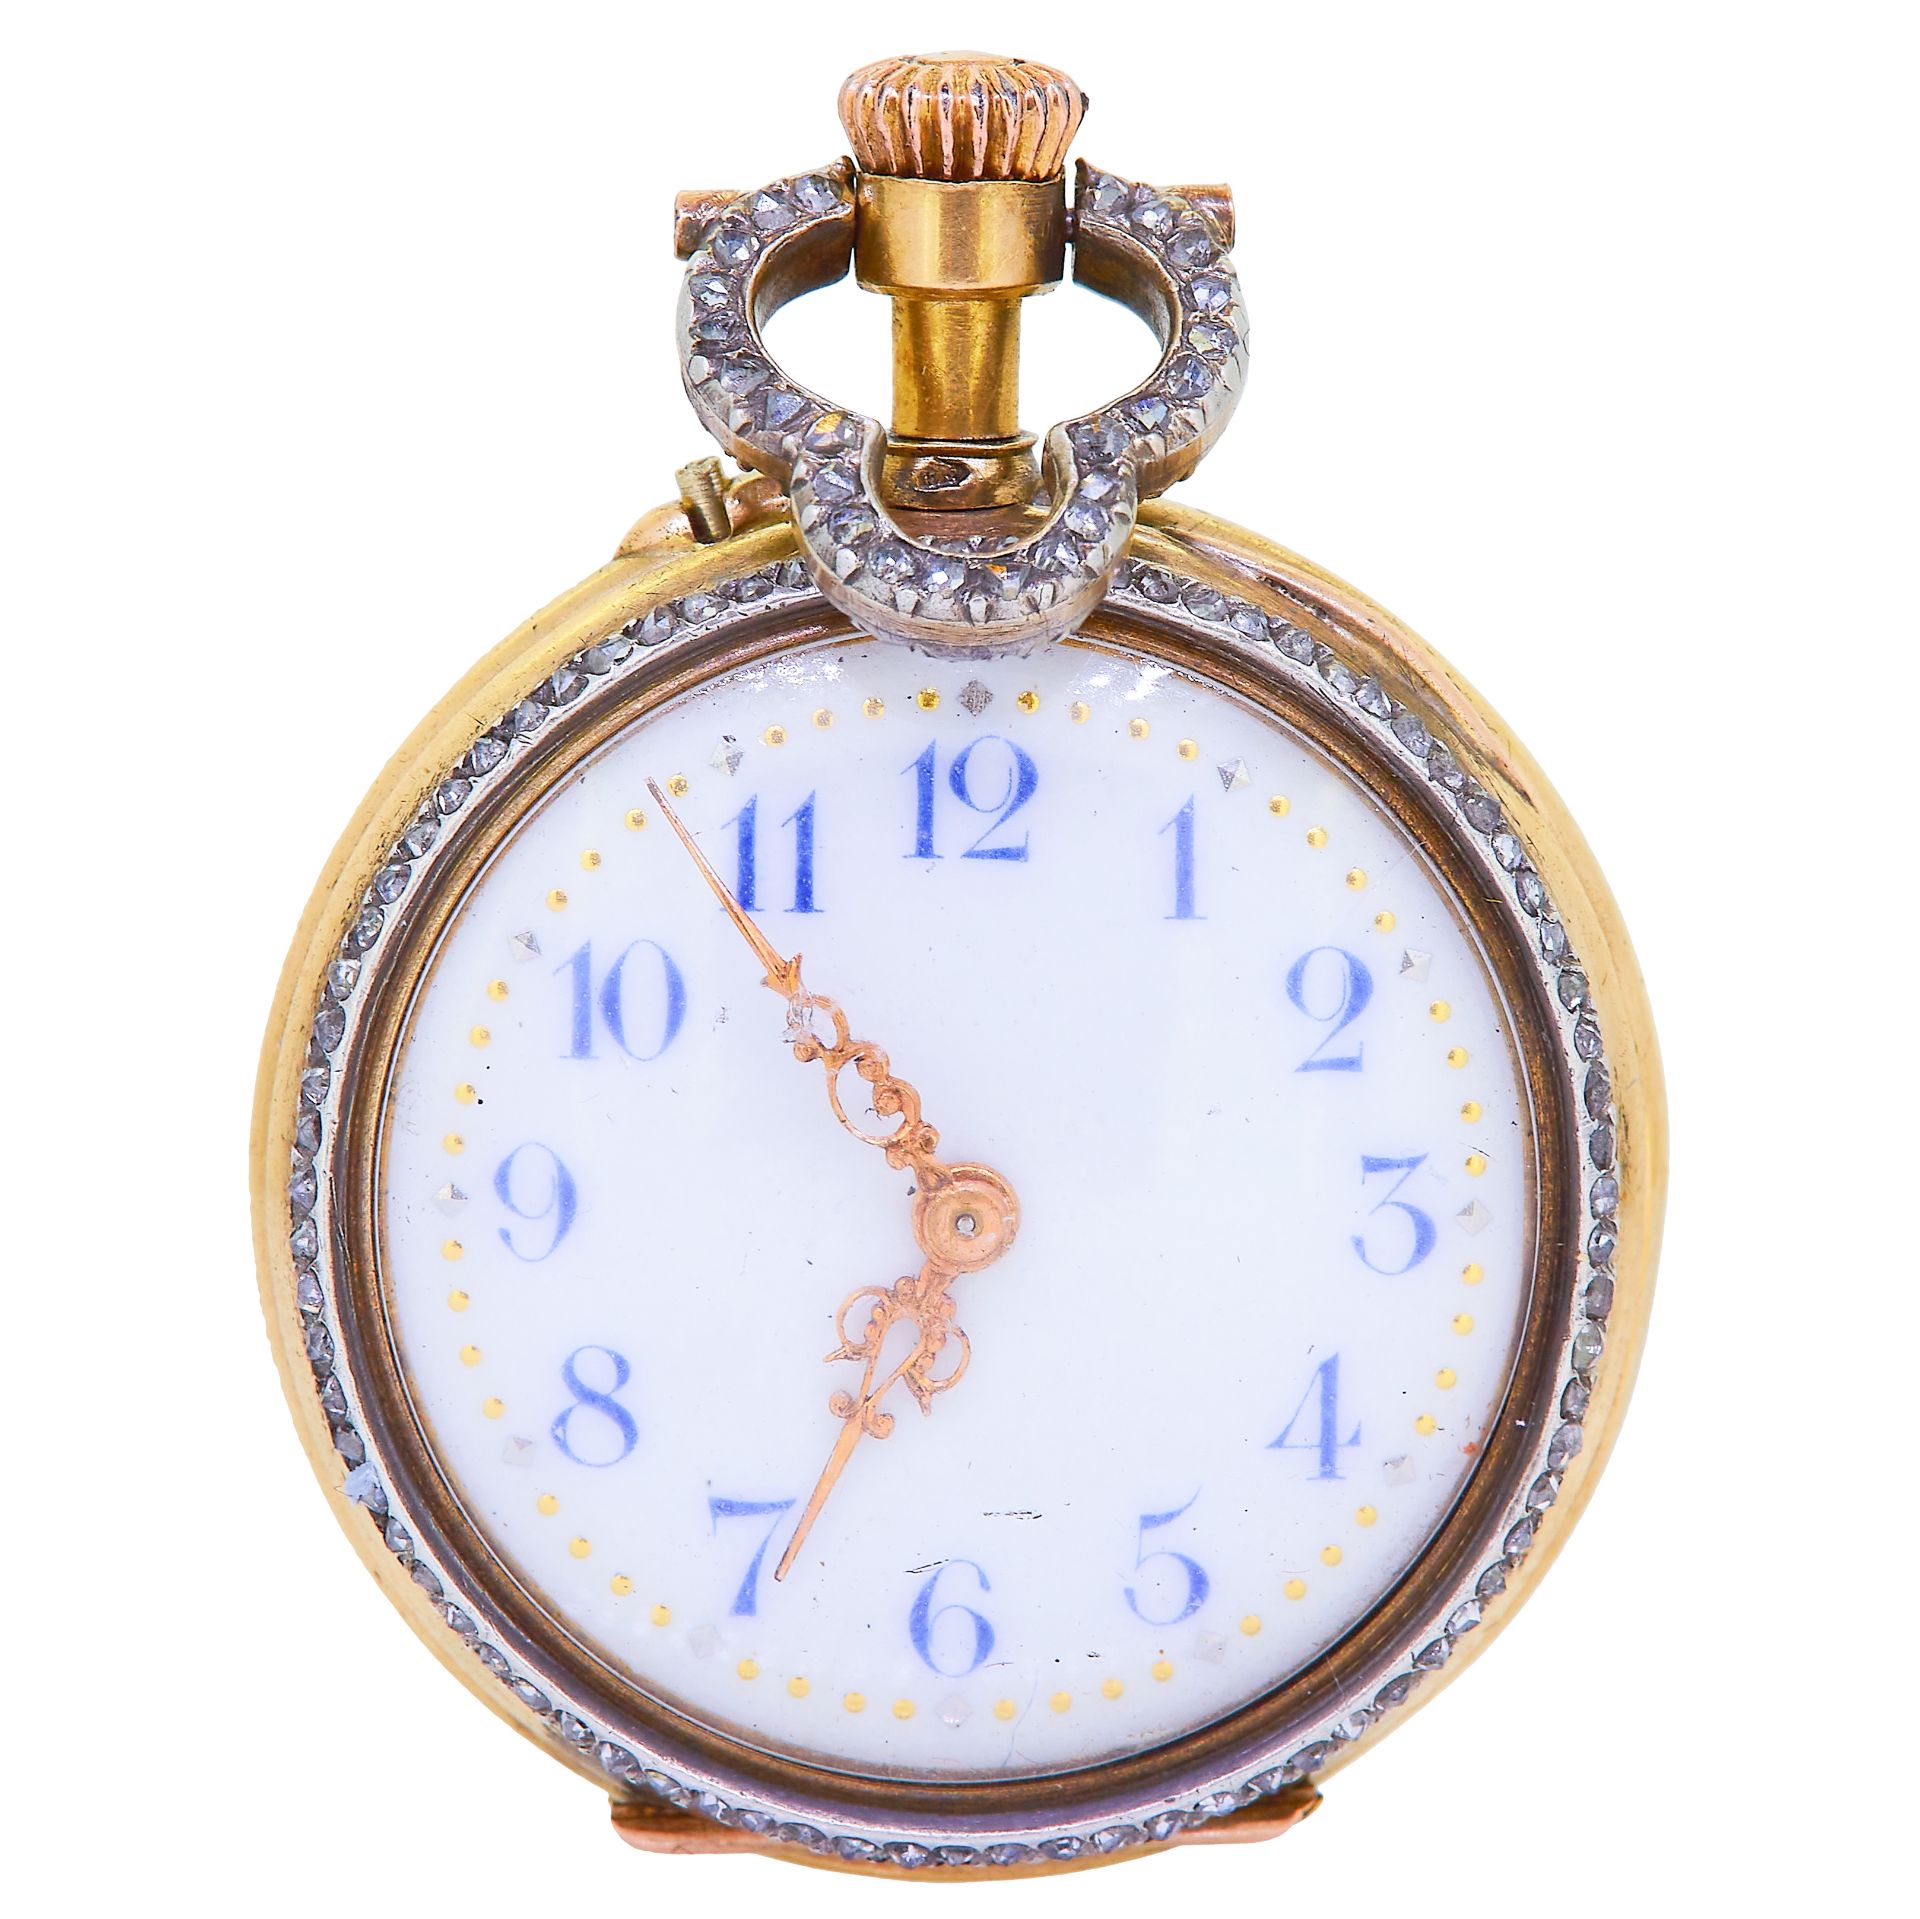 LECOULTRE & CIE, ANTIQUE DIAMOND AND ENAMEL POCKET WATCH - Image 2 of 2